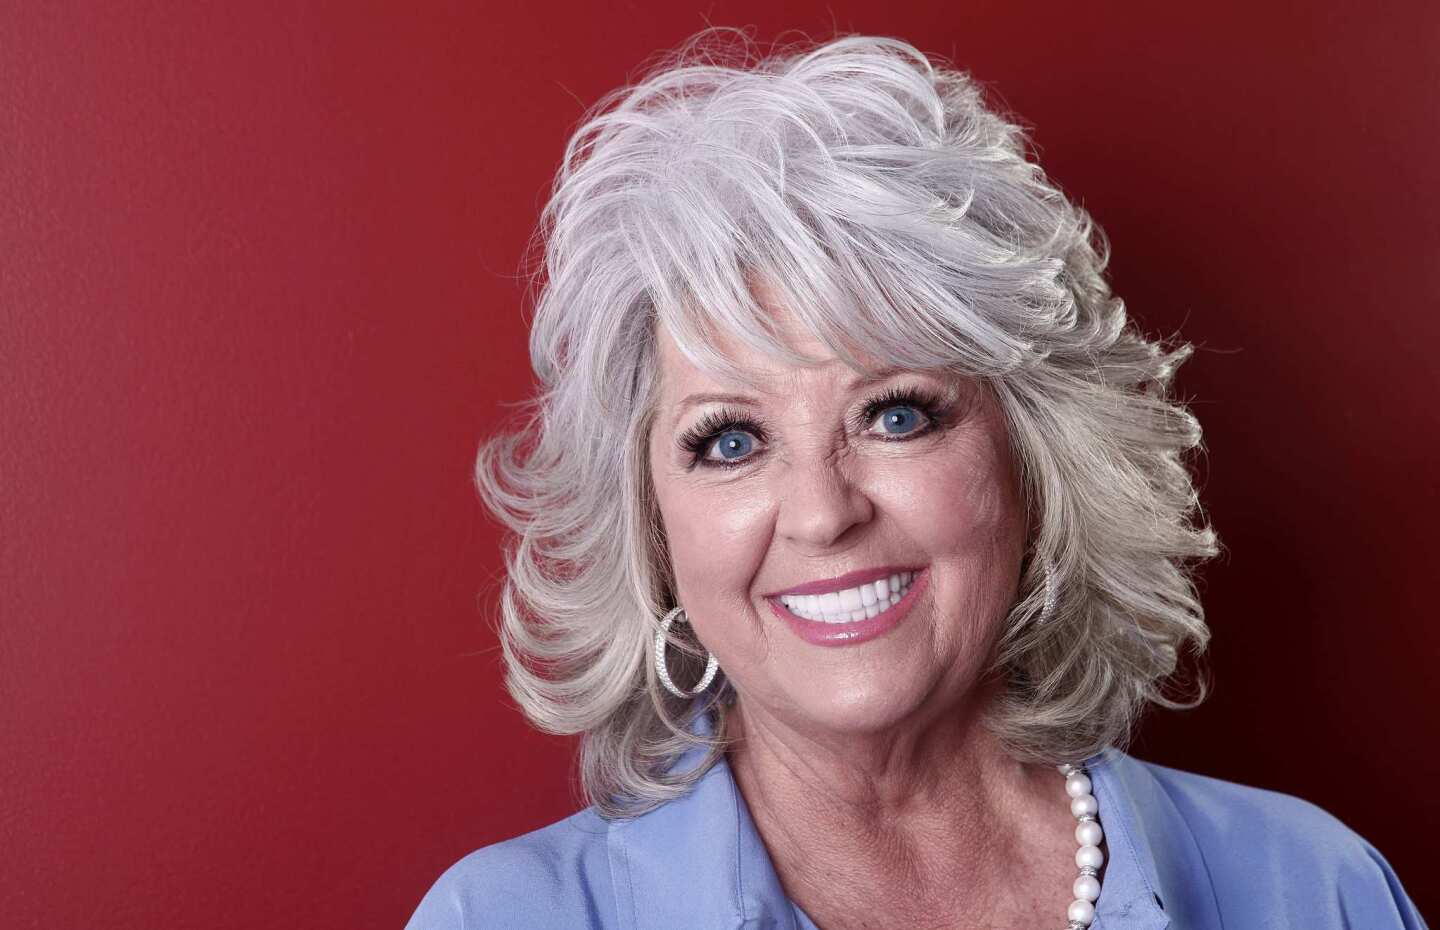 When Paula Deen admitted she had diabetes last year, many took note because Deen was the queen of high-fat, high-calorie Southern cooking.